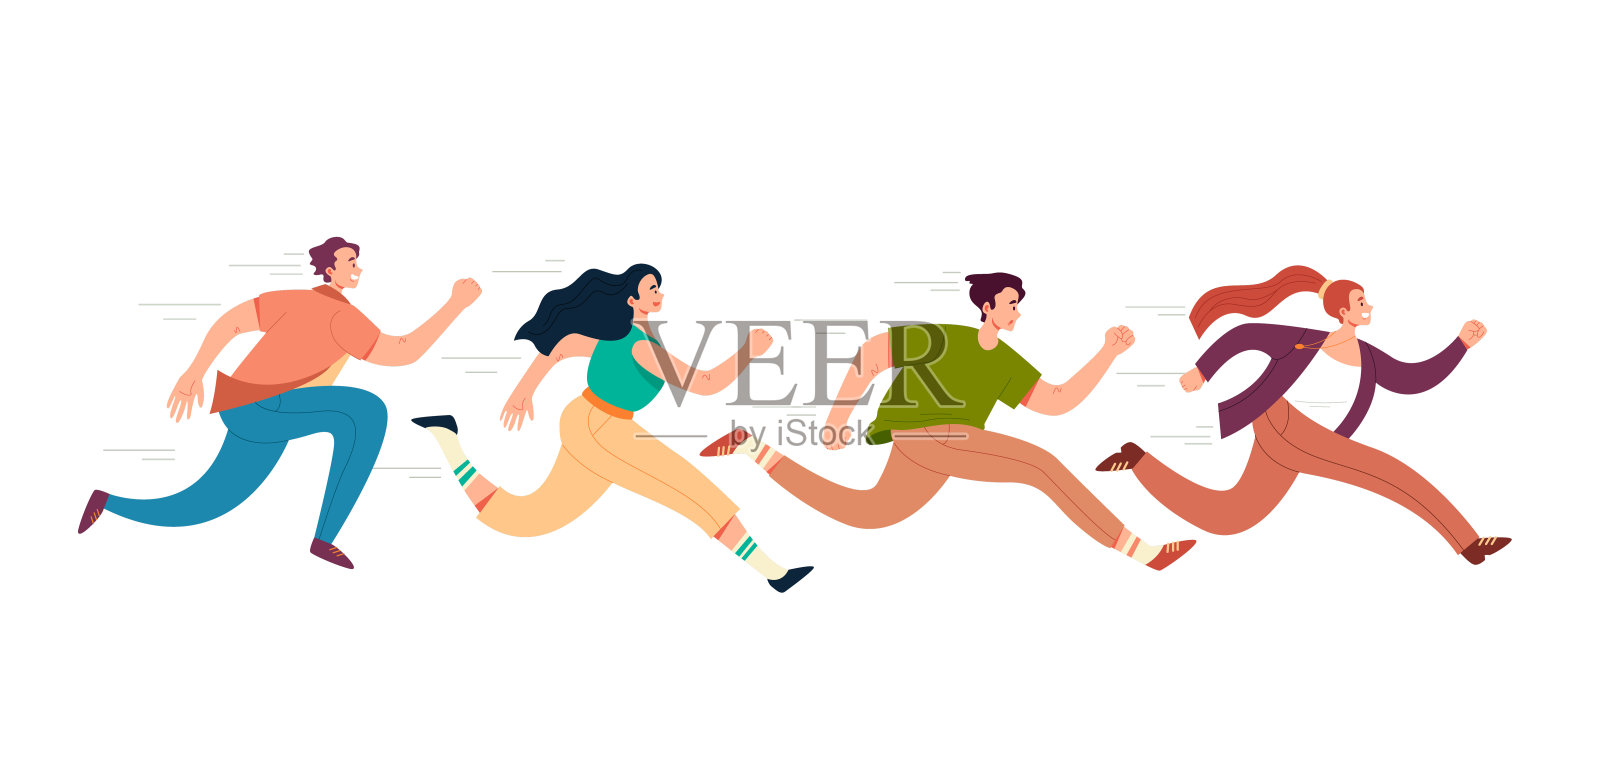 People man womwn students office workers running isolated set. Vector flat graphic design illustration插画图片素材